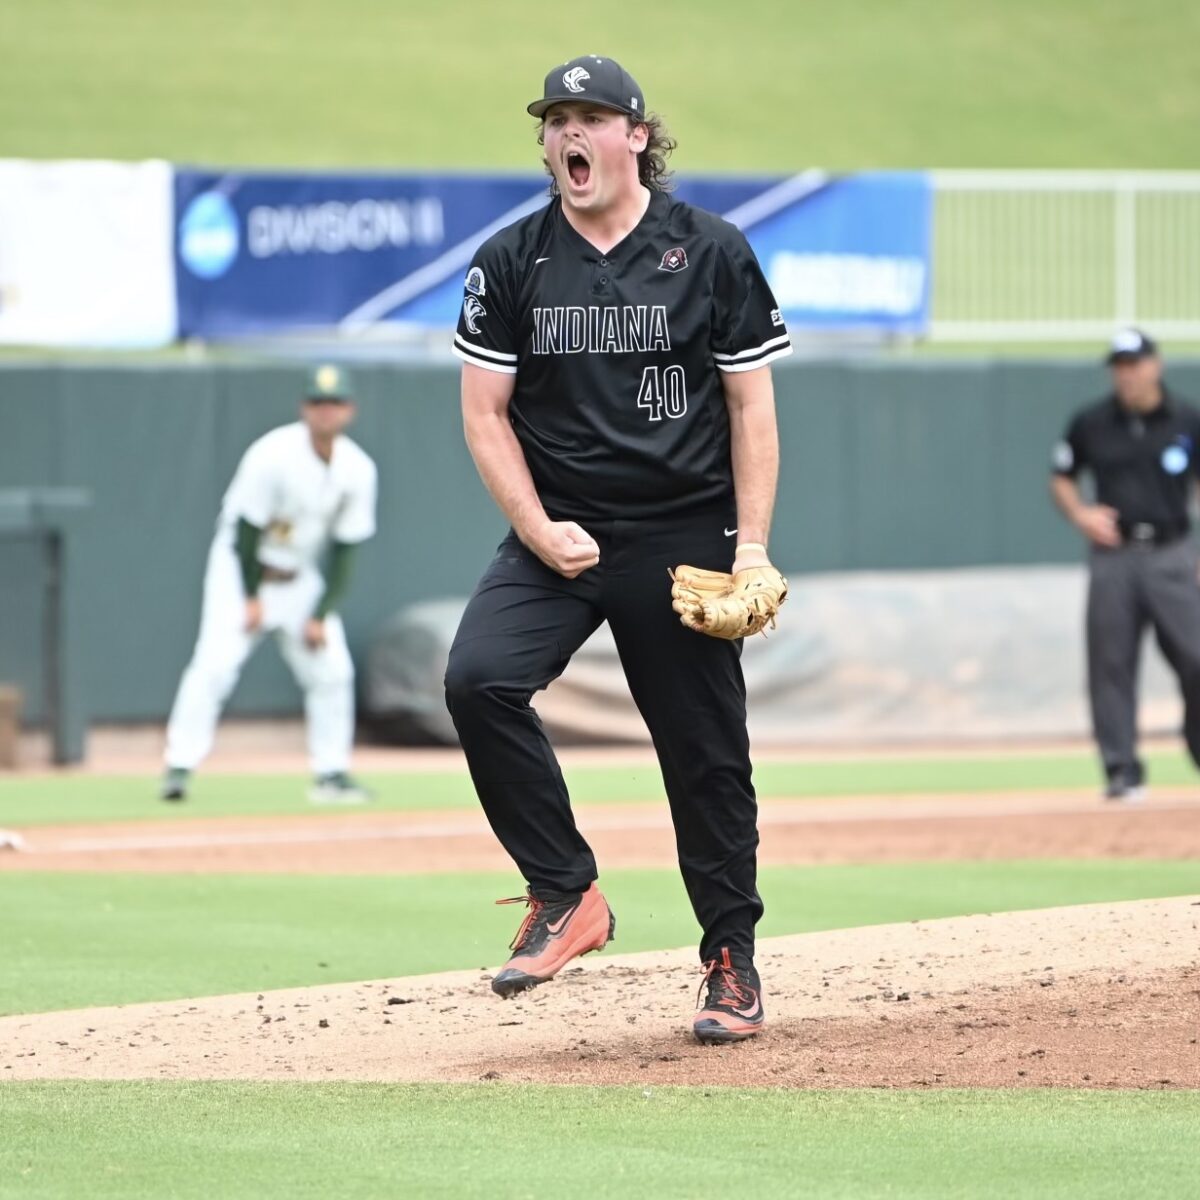 NCAA Division II baseball: Norwin product Elijah Dunn drives in lone run, Jake Black tosses eight scoreless innings to propel IUP past Point Loma and into College World Series semis